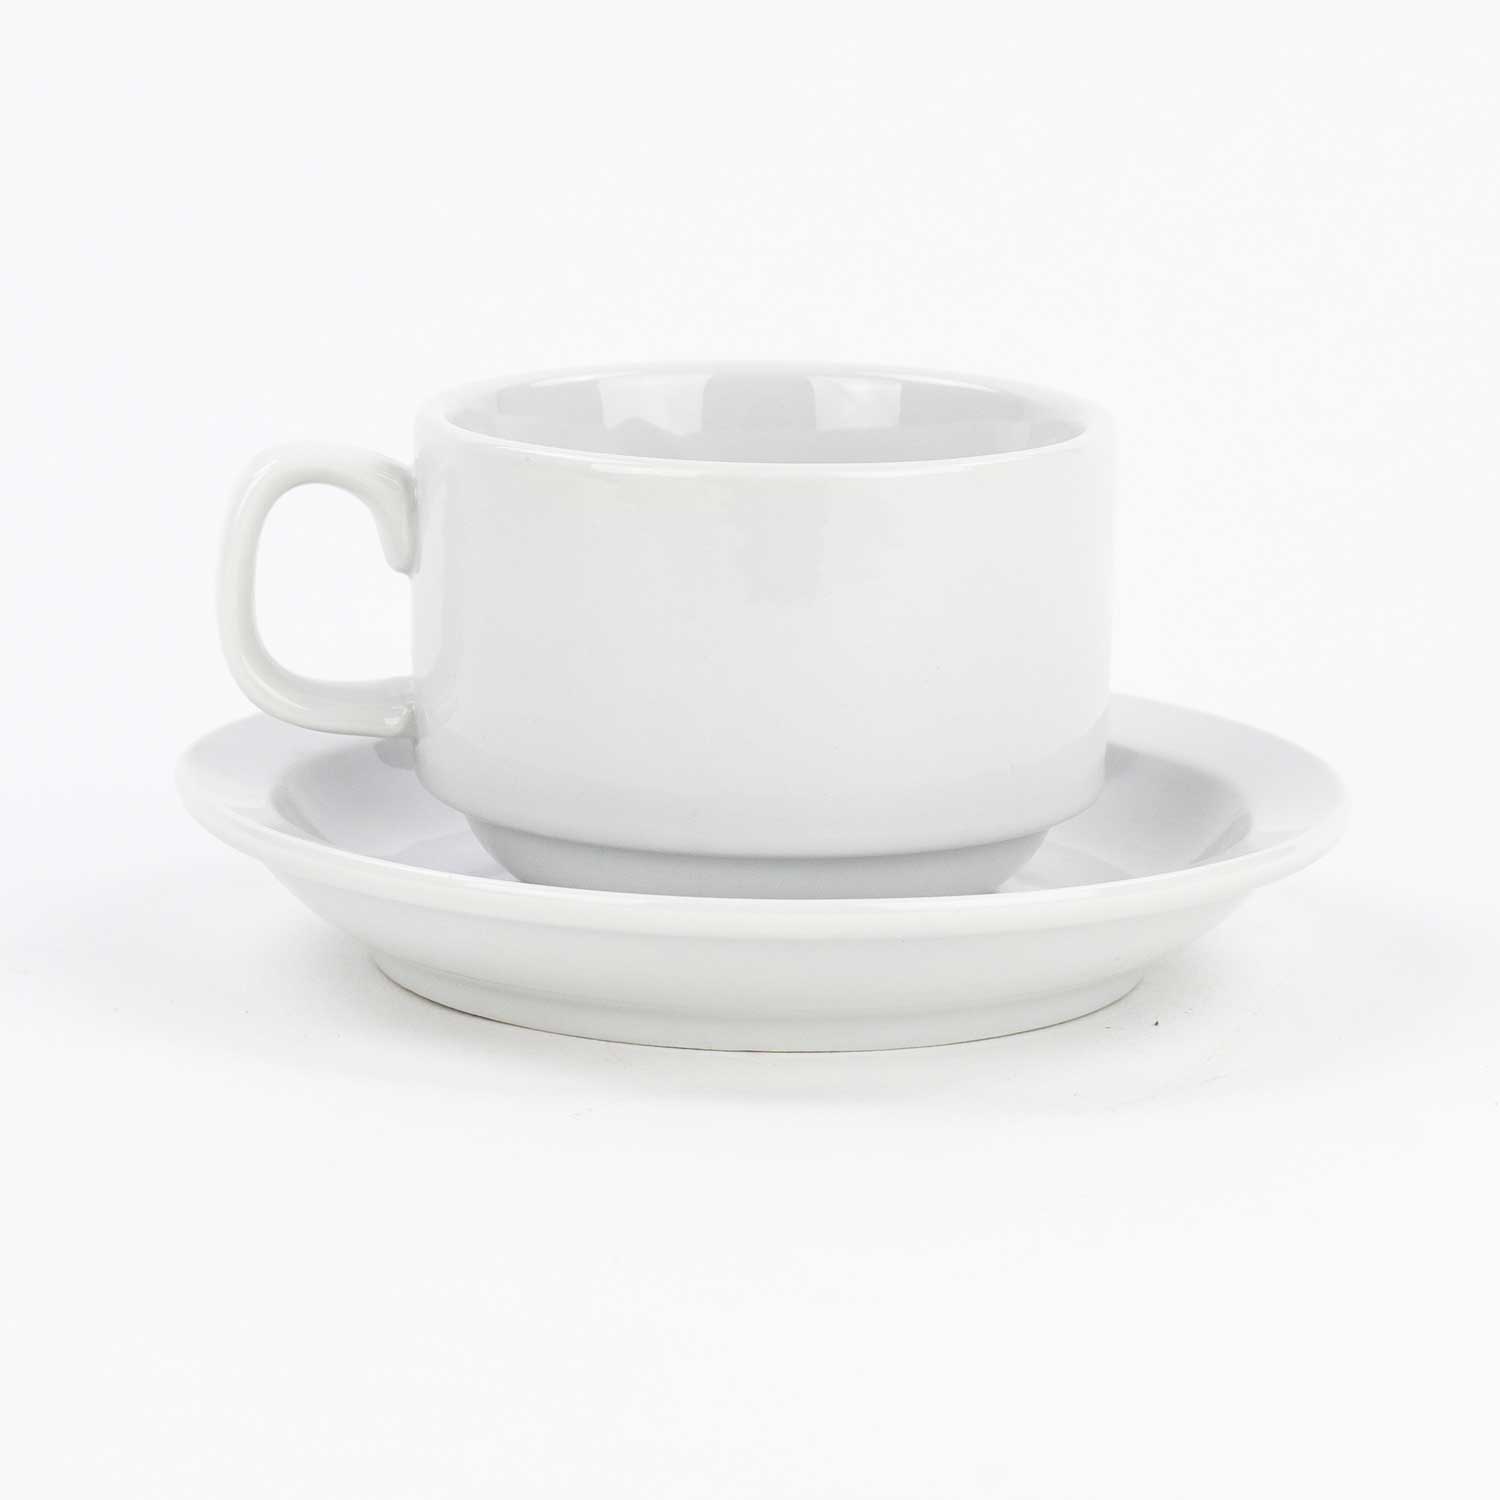 Double Walls Coffee Cup 350 ml x2 - Cup and saucer